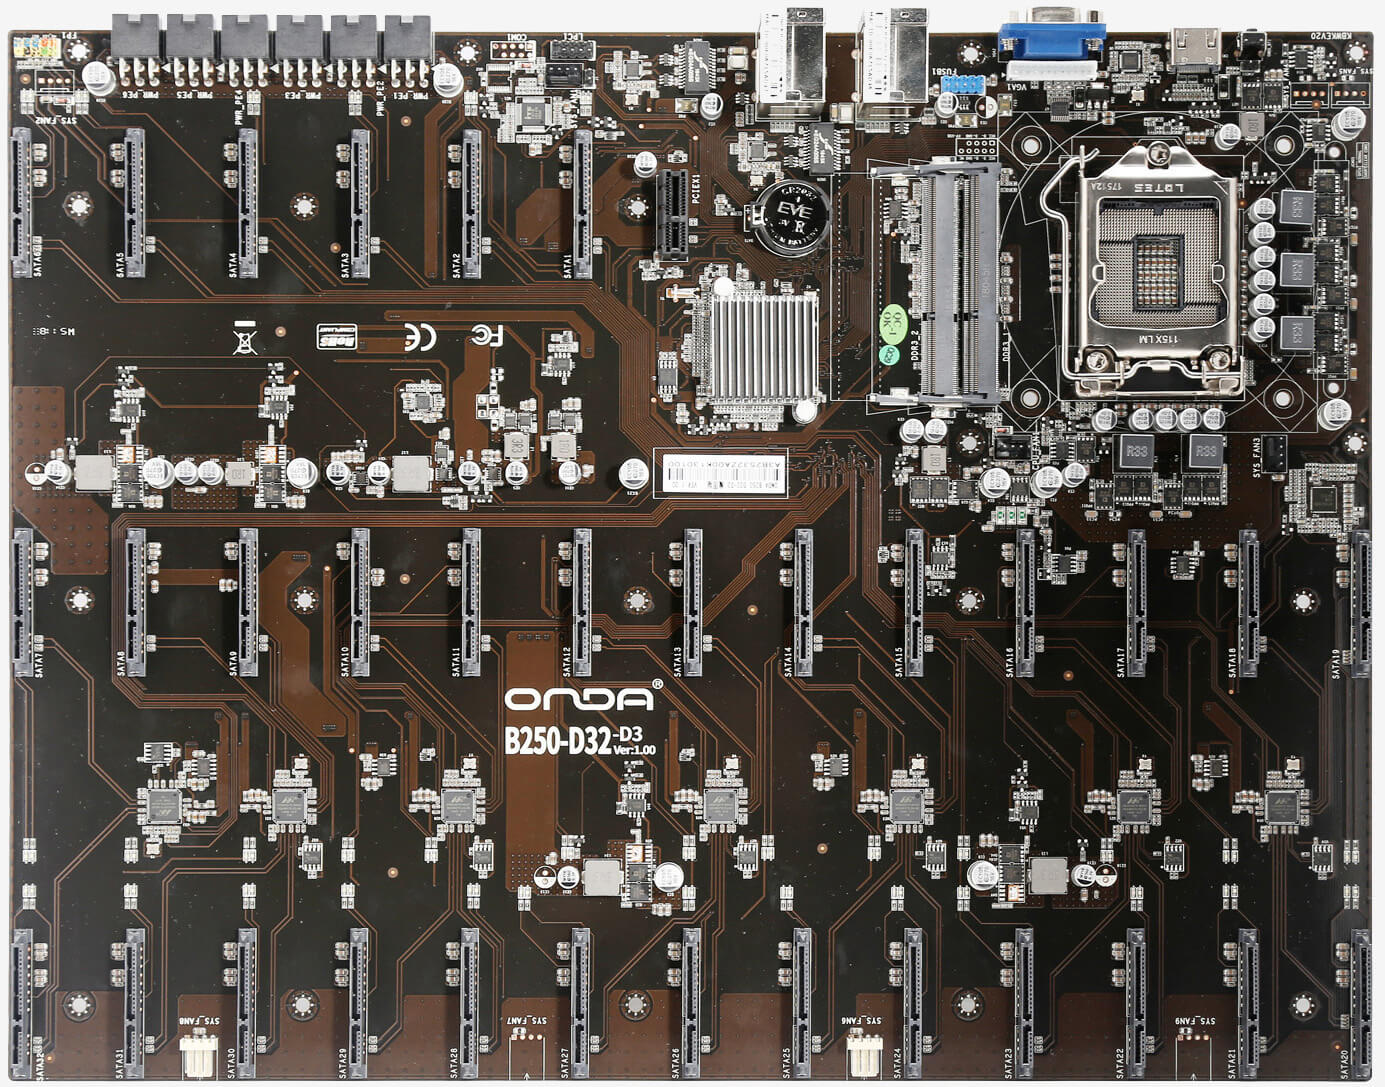 Storage Wars: this motherboard packs a staggering 32 SATA ports